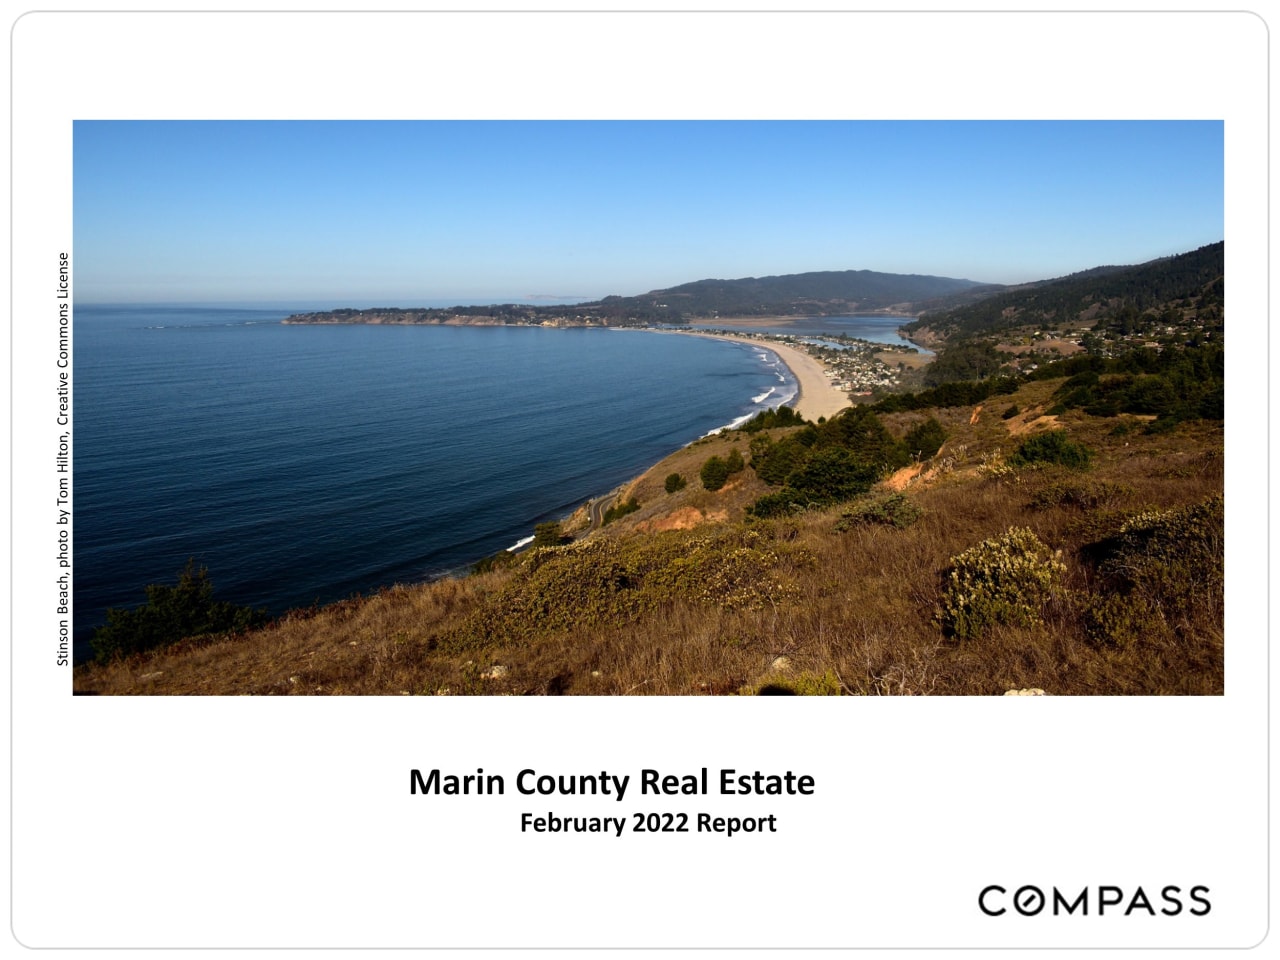 Marin County Home Prices, Market Conditions and Trends